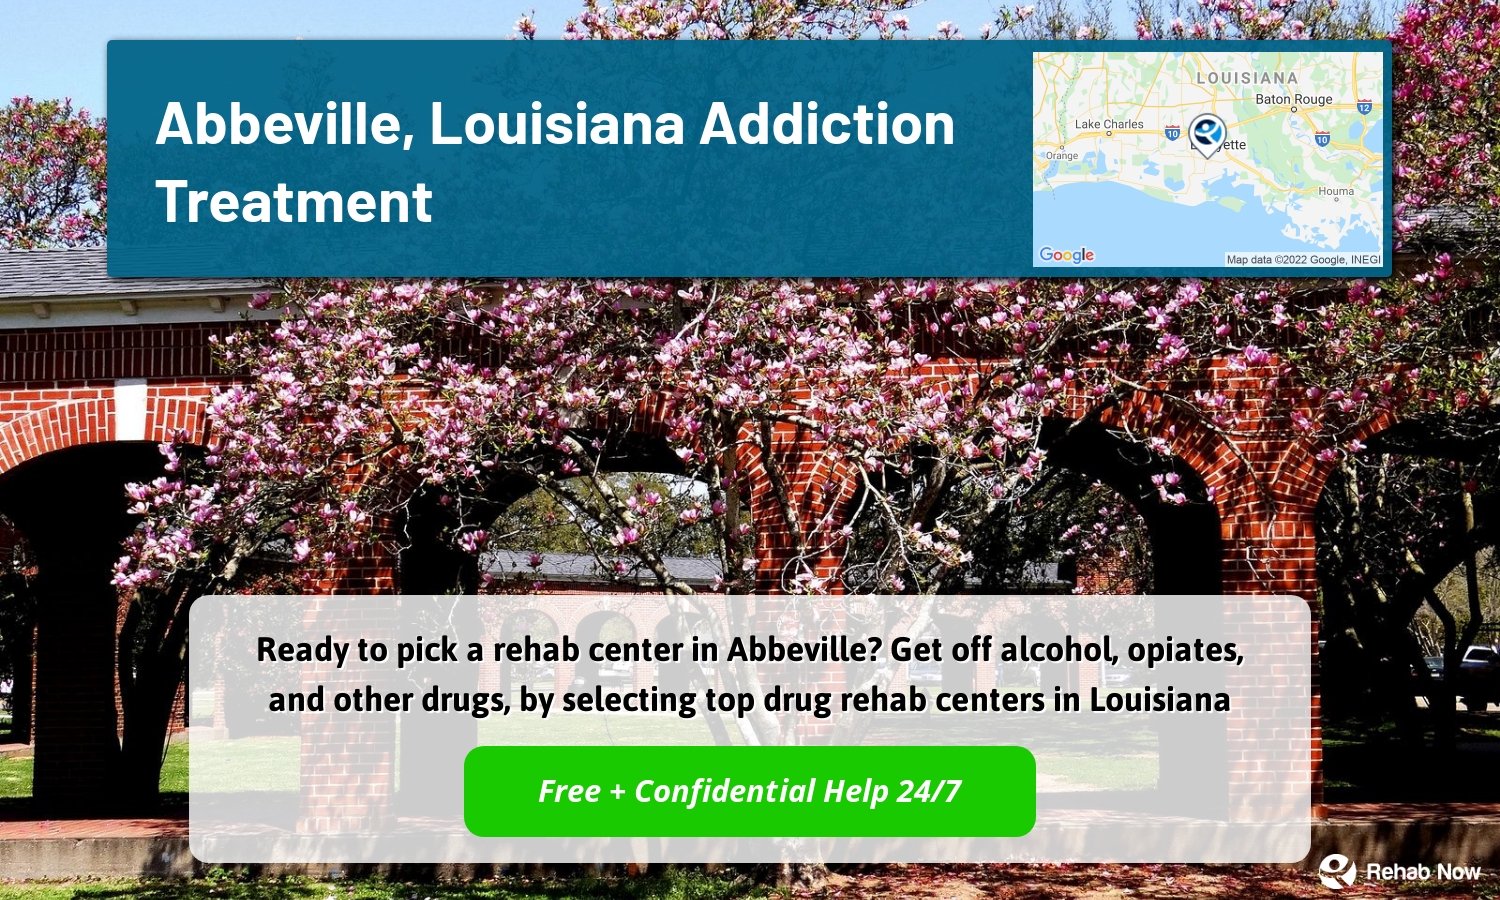 Ready to pick a rehab center in Abbeville? Get off alcohol, opiates, and other drugs, by selecting top drug rehab centers in Louisiana